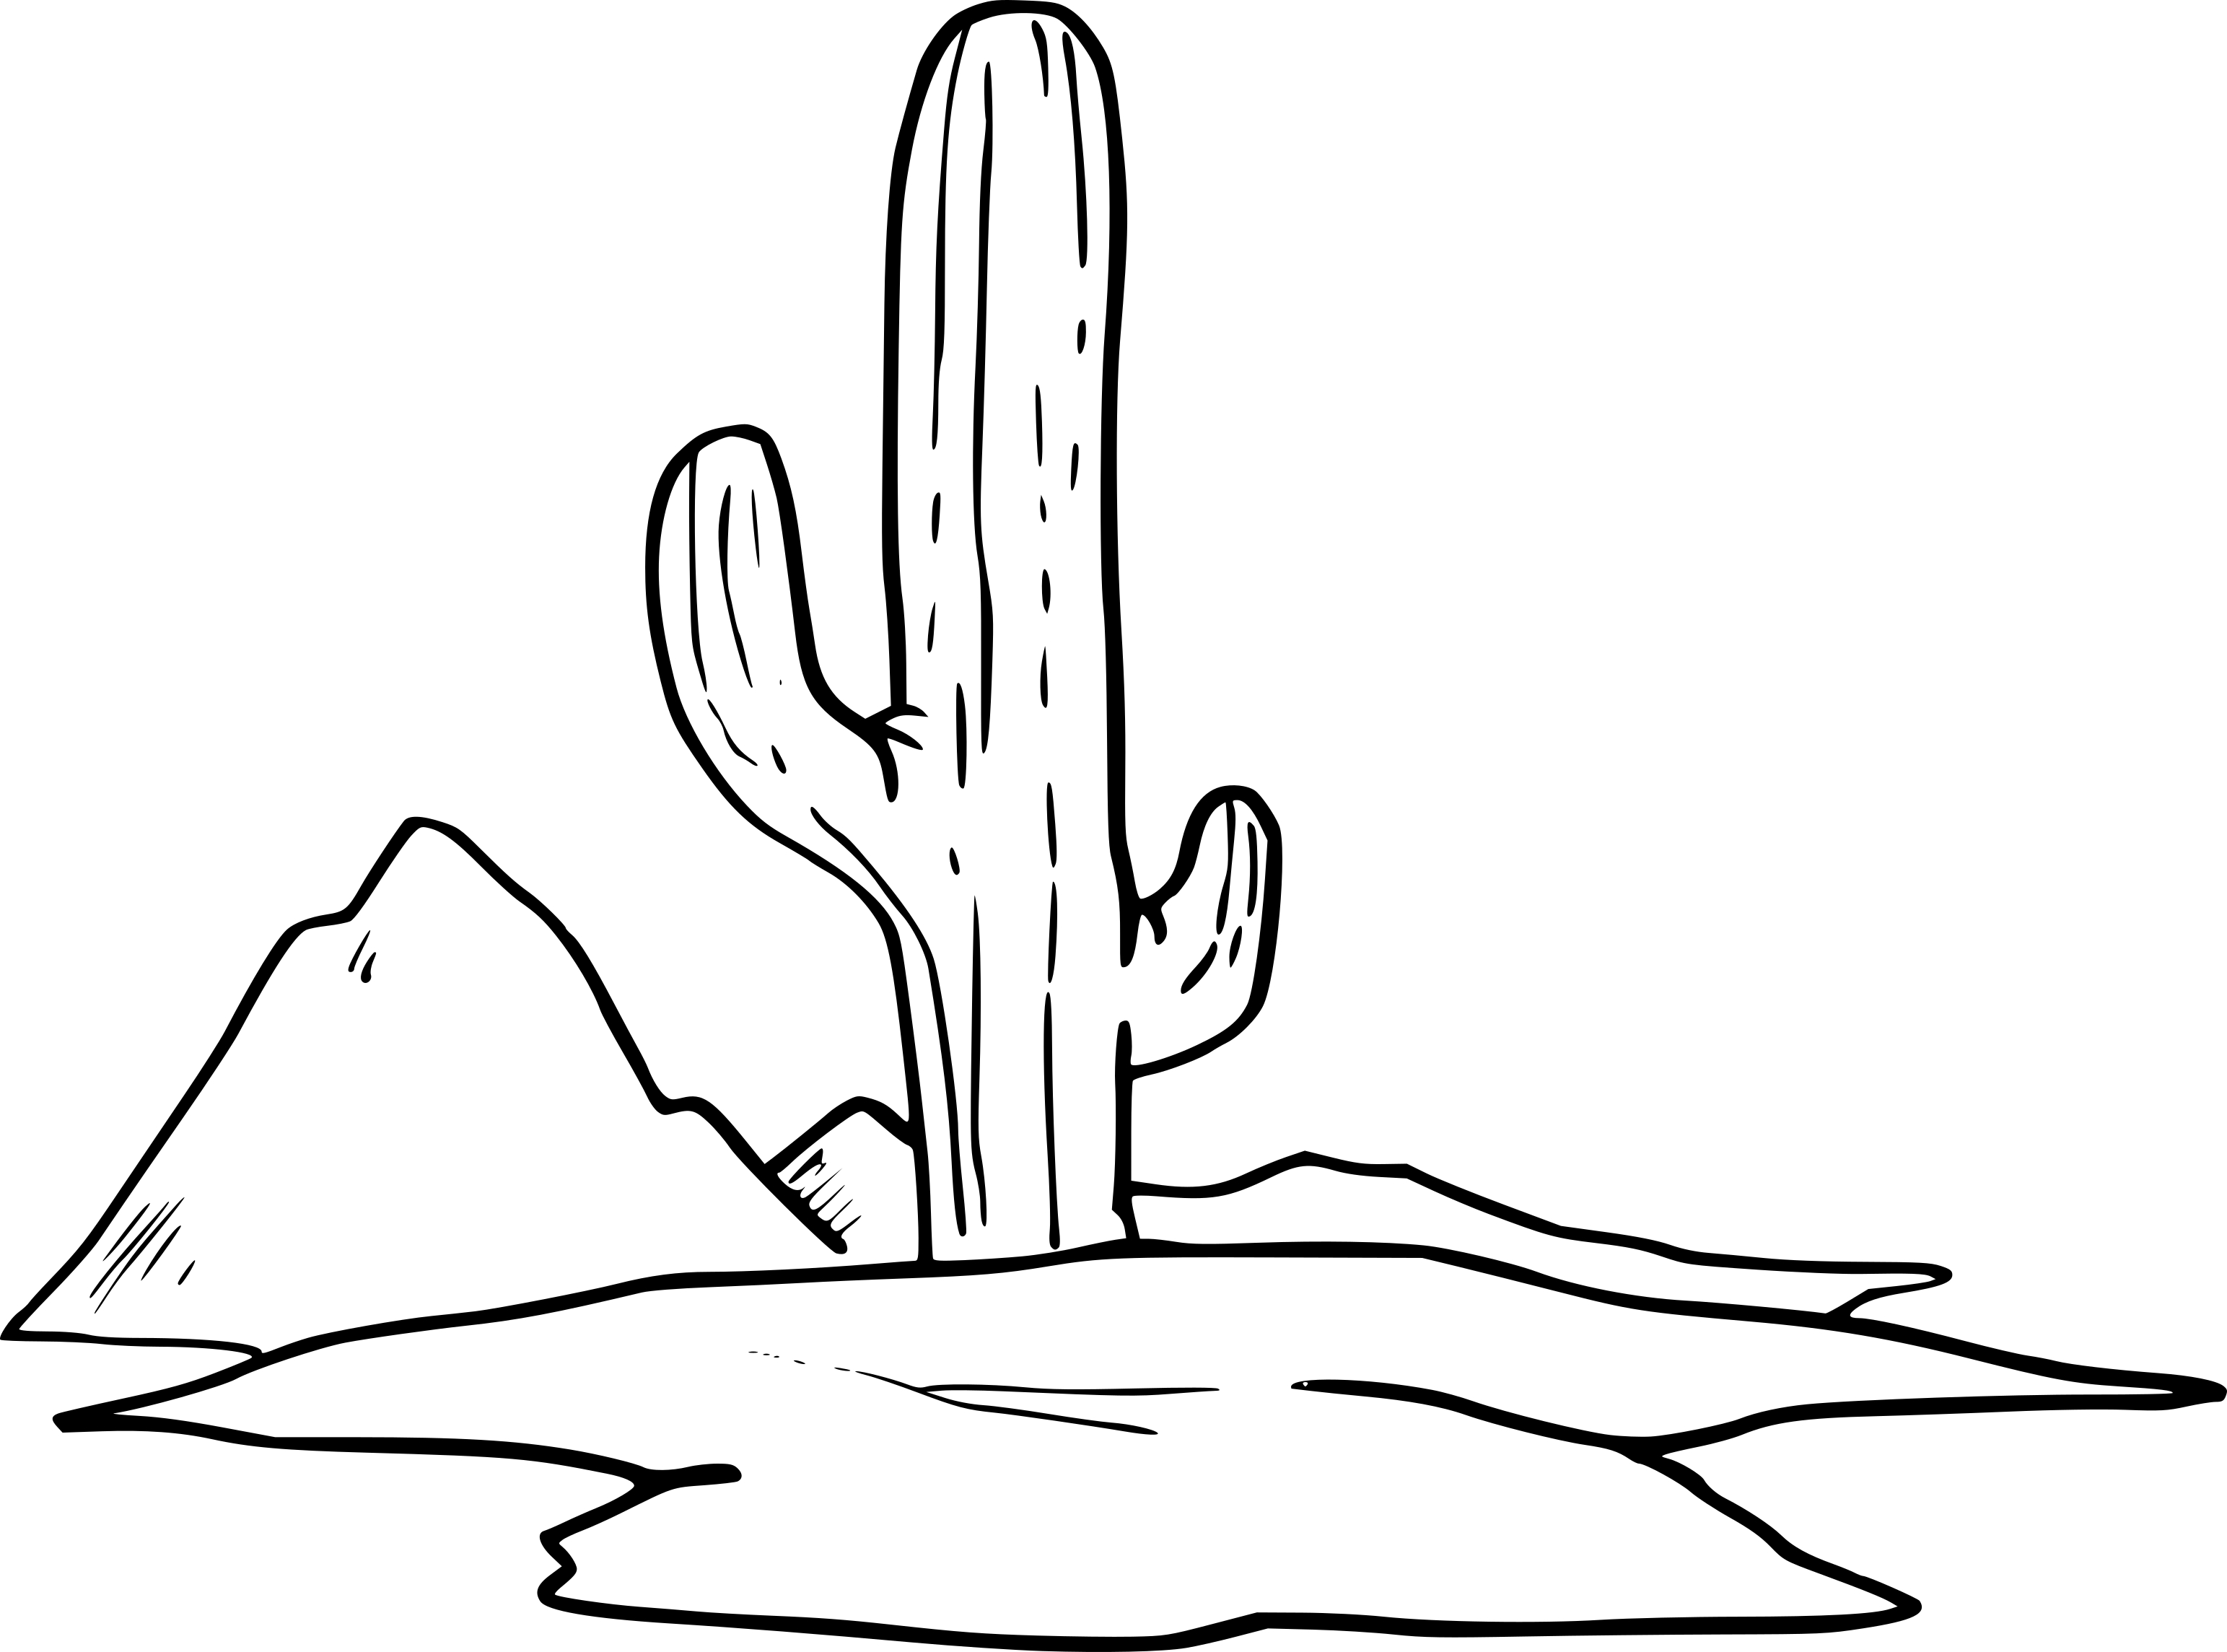 Cactus coloring page